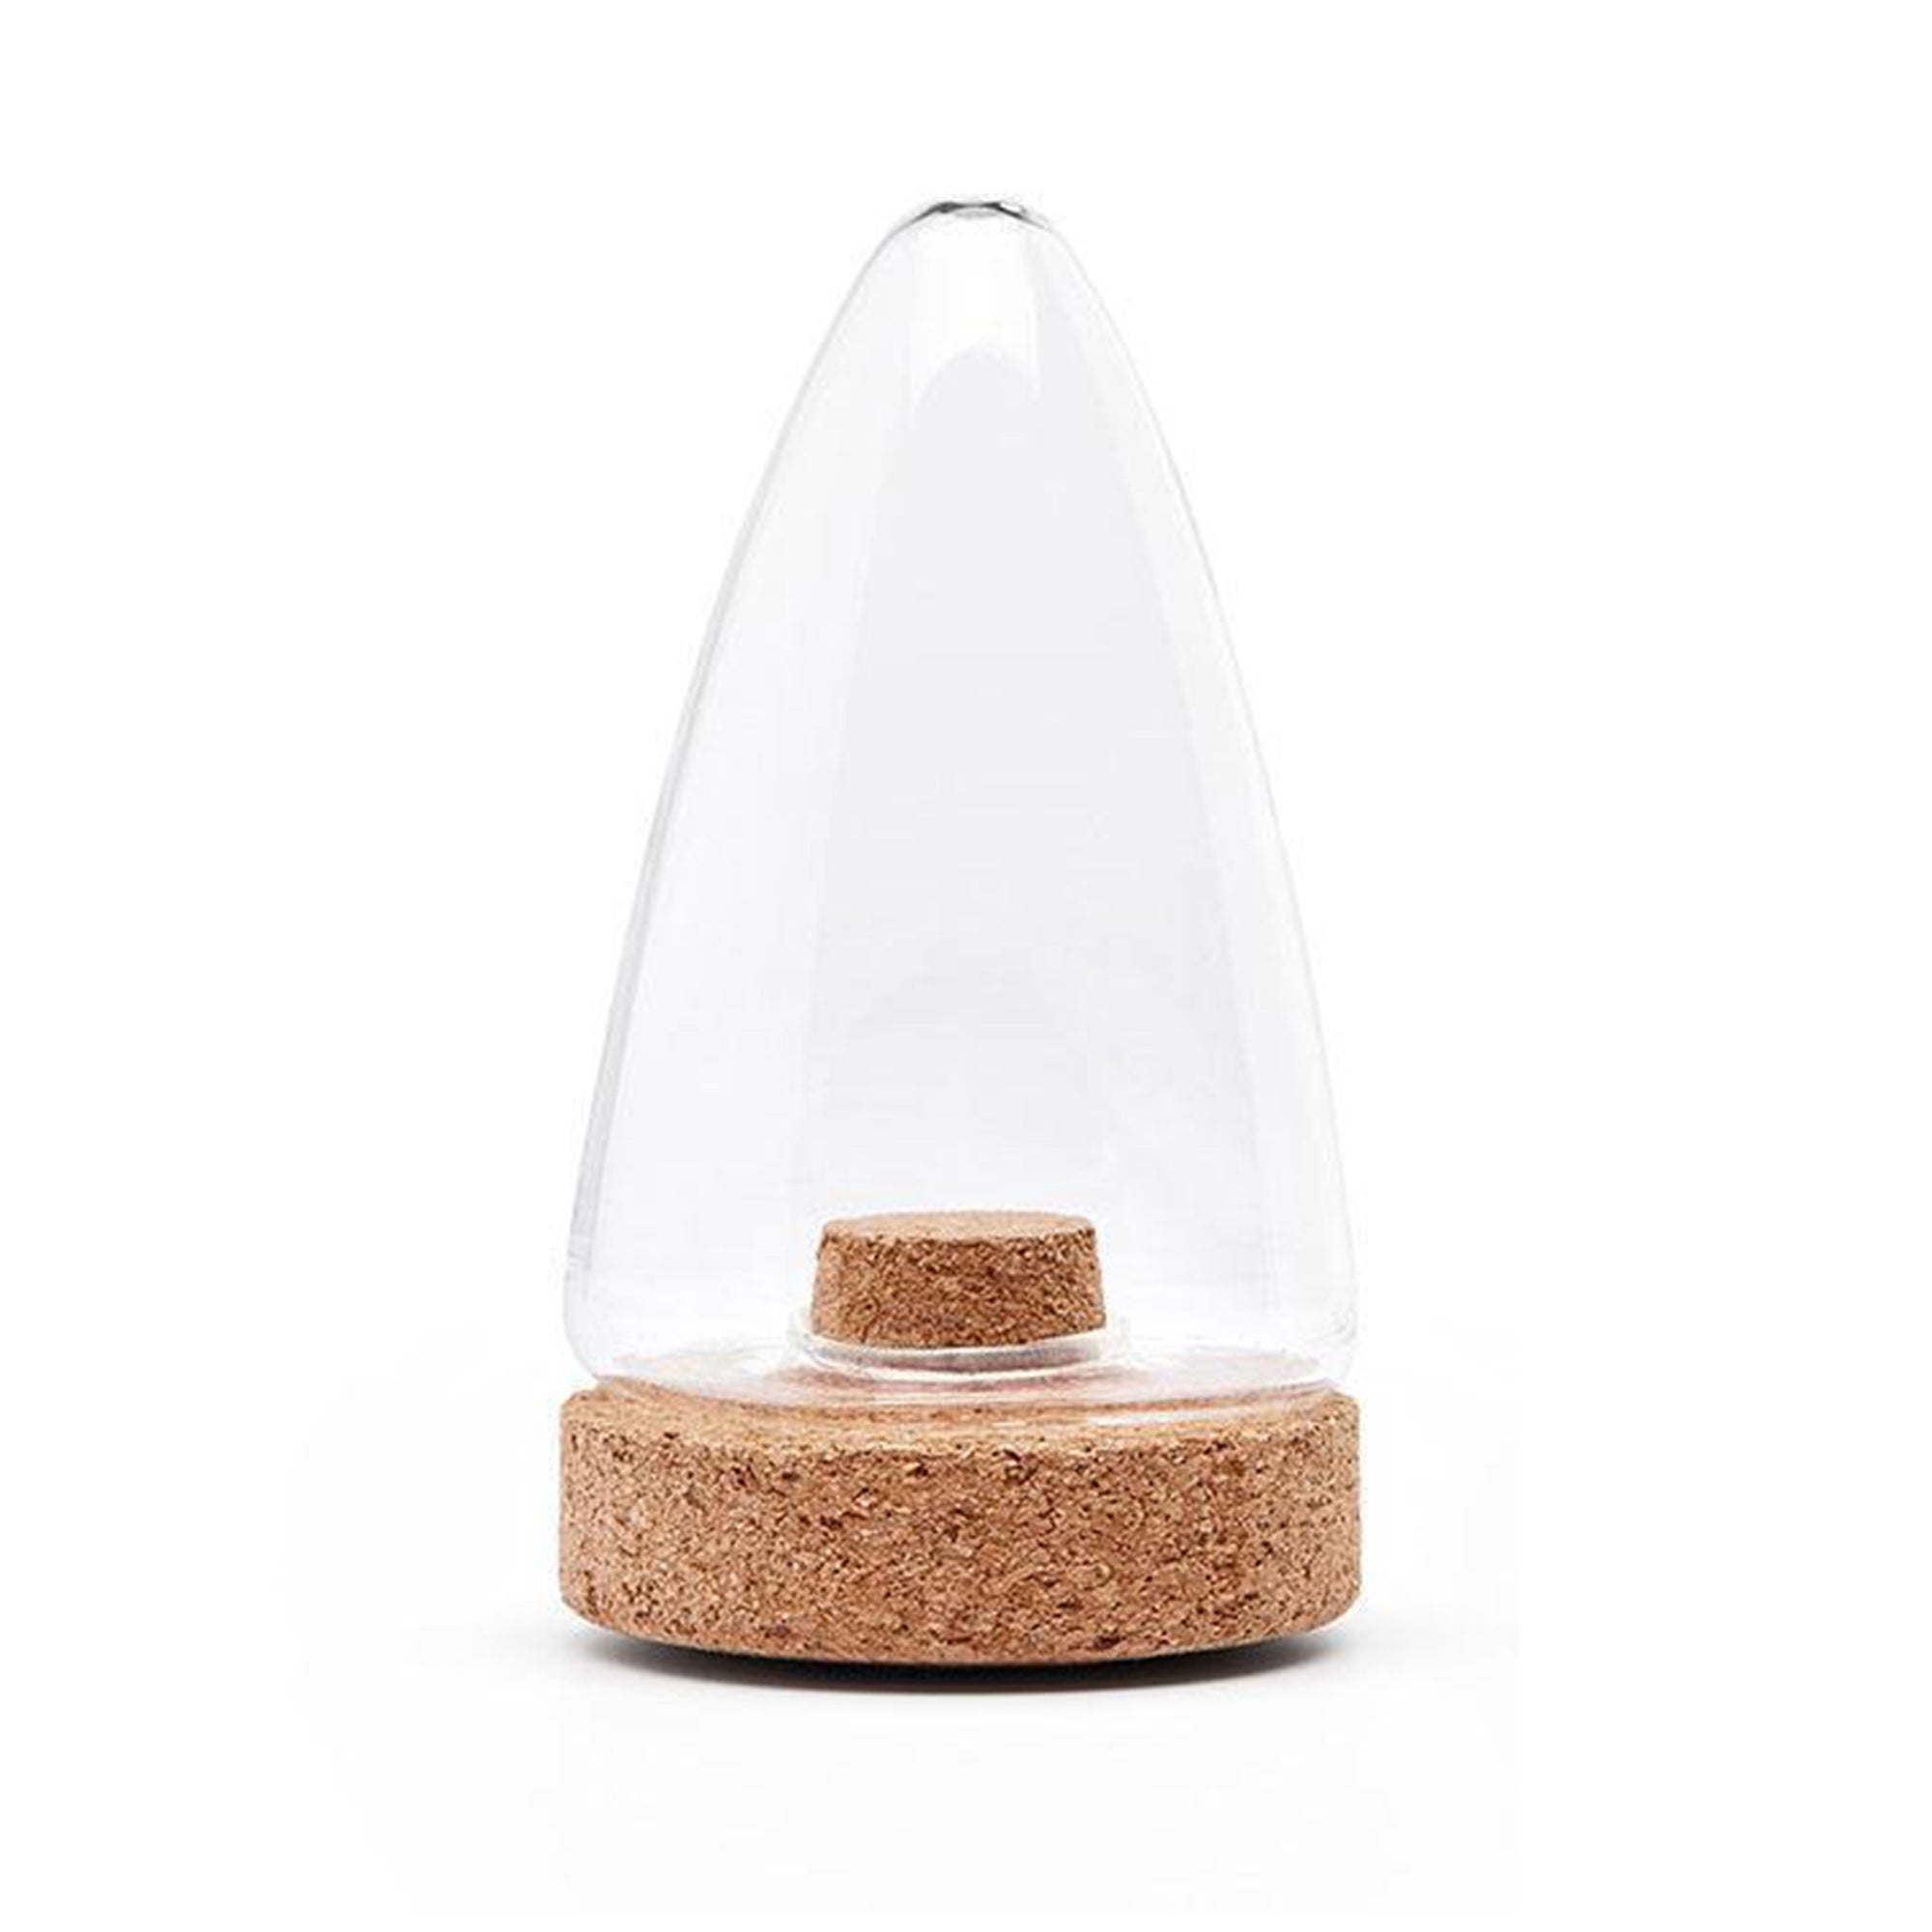 Fine Salt Shaker pointed cylindrical clear glass shaker with cork base, on white background